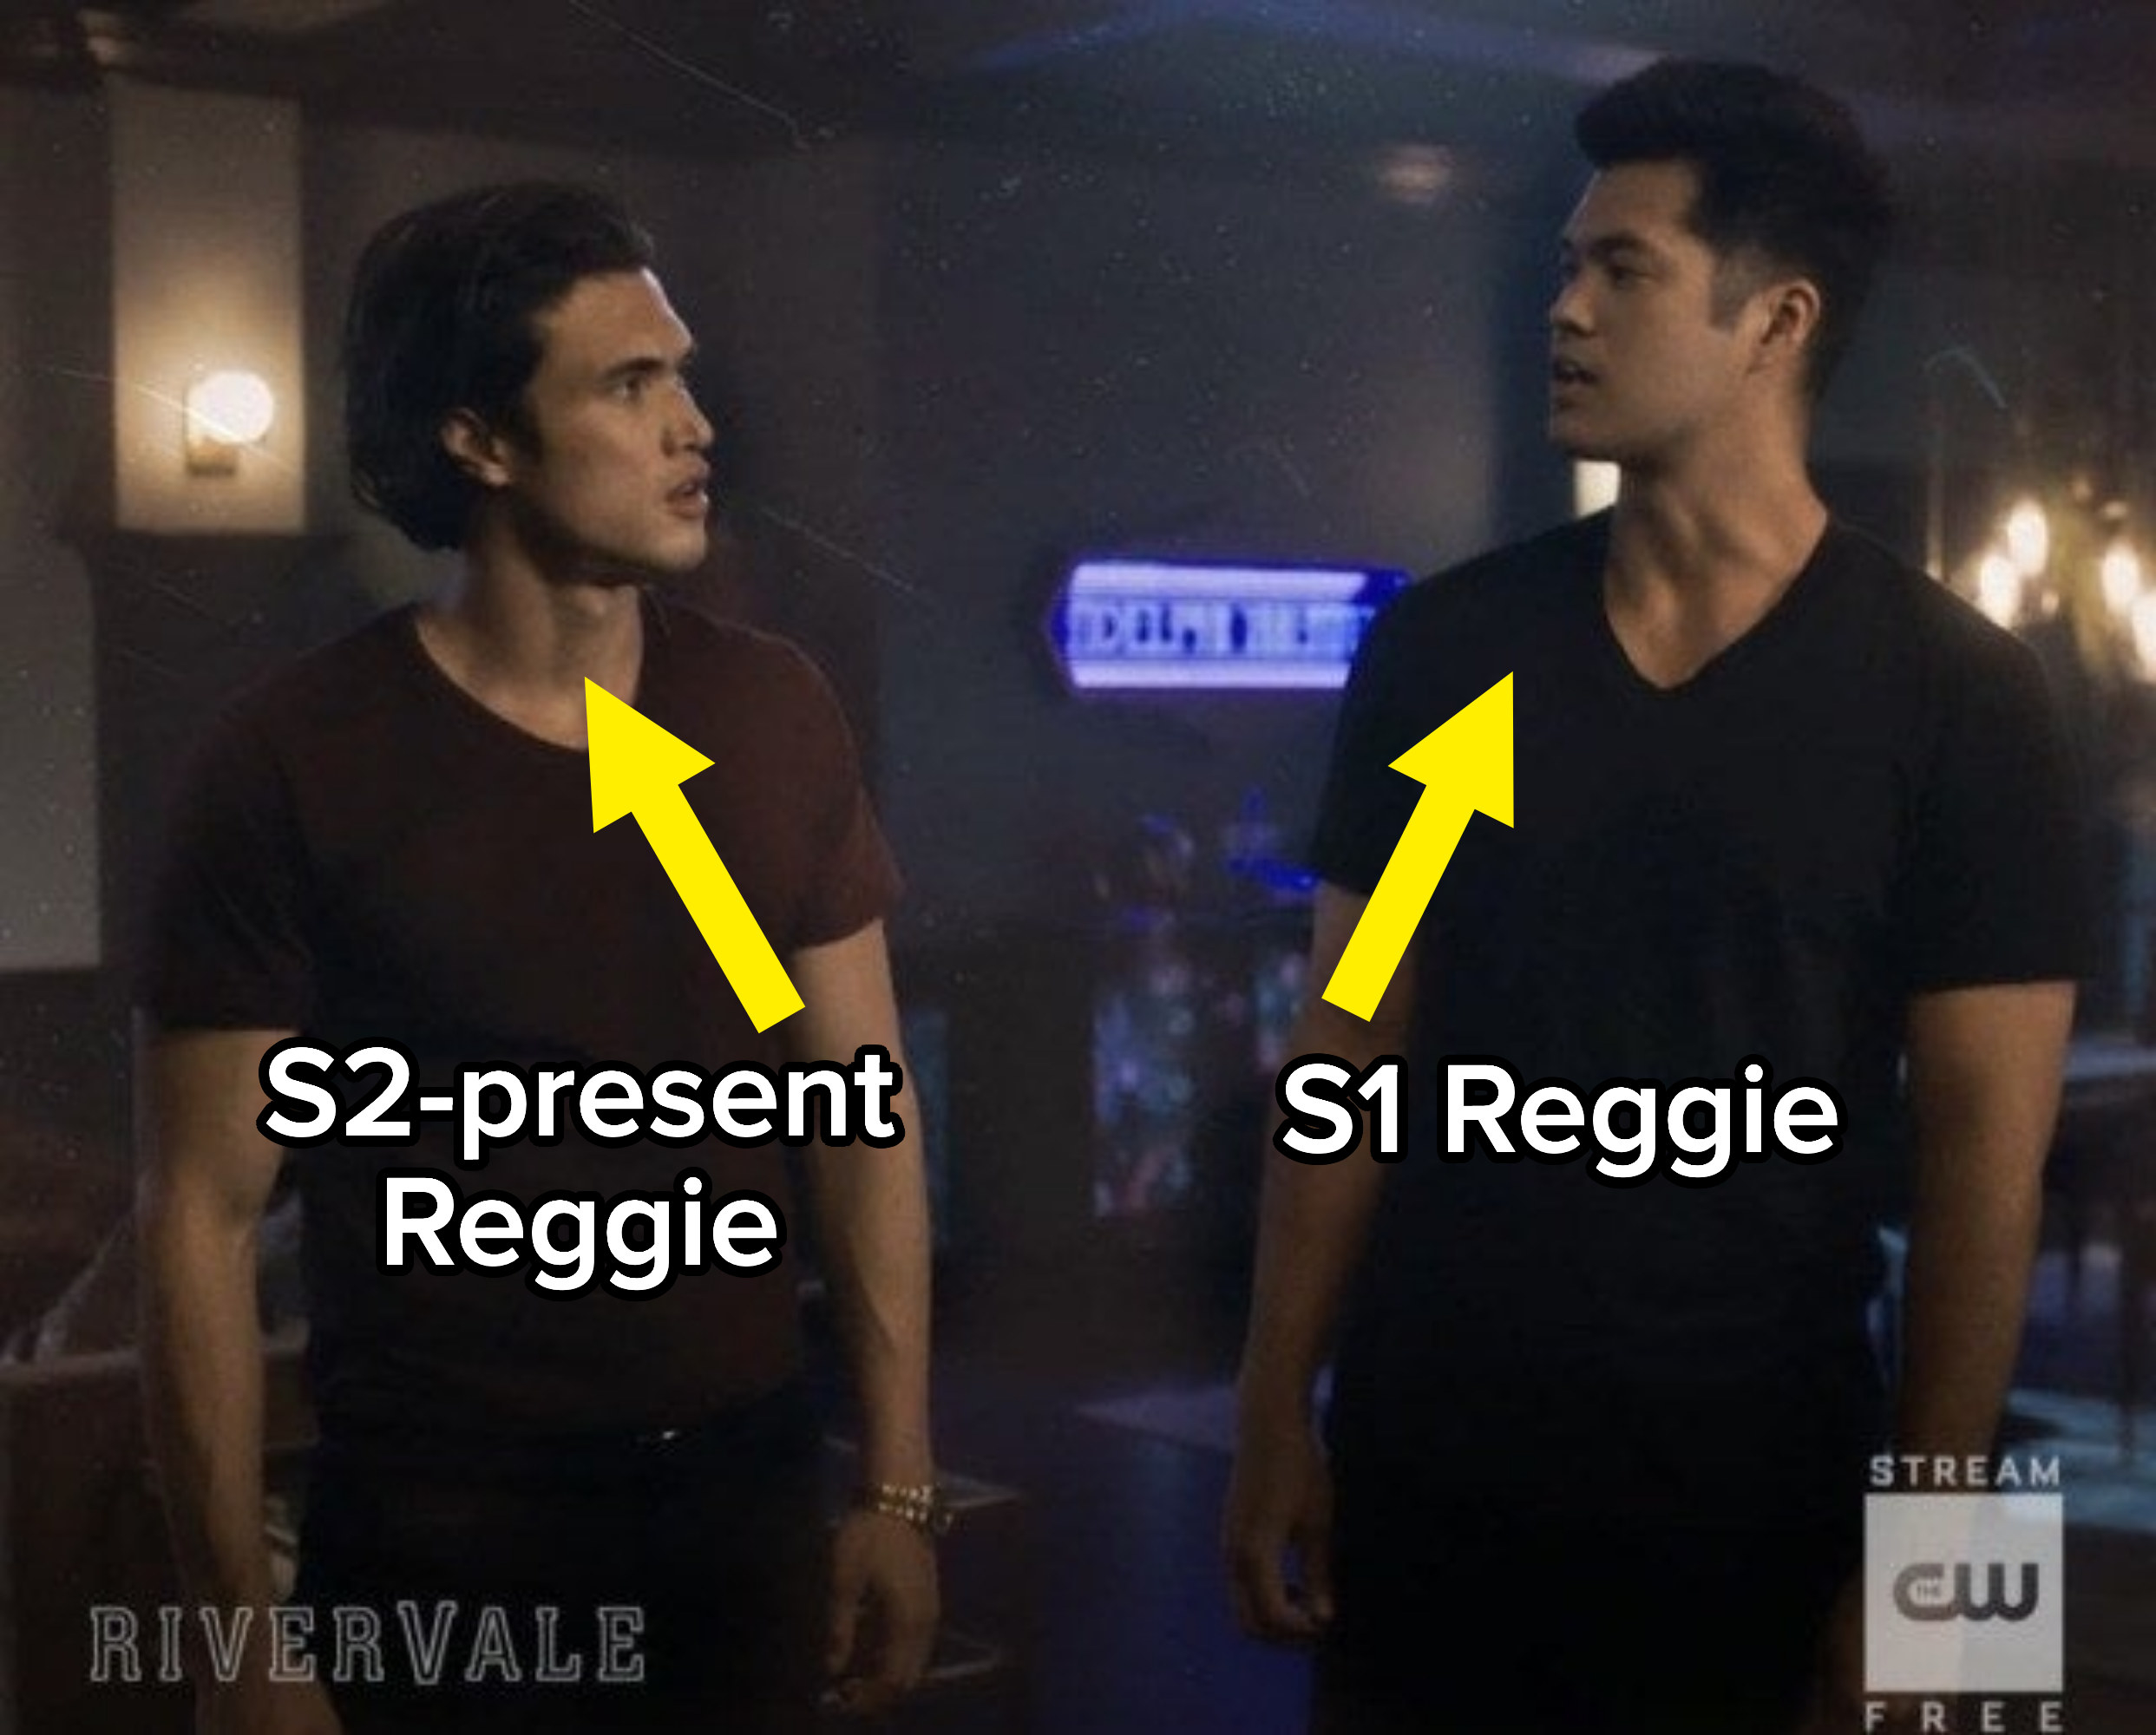 The seasons 1 and 2 Reggies in the same room